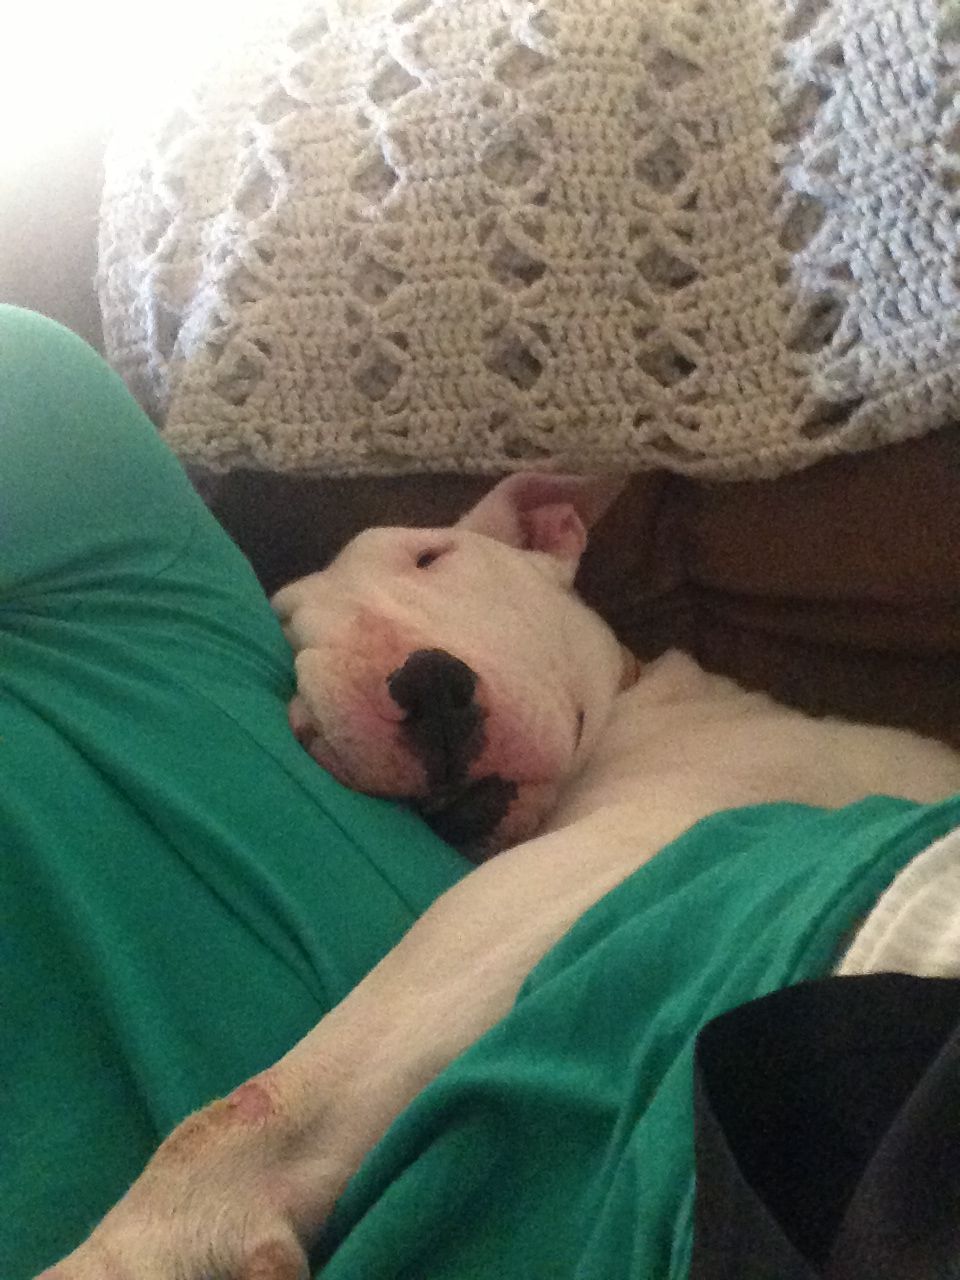 English Bull Terrier hugging man from behind on the couch